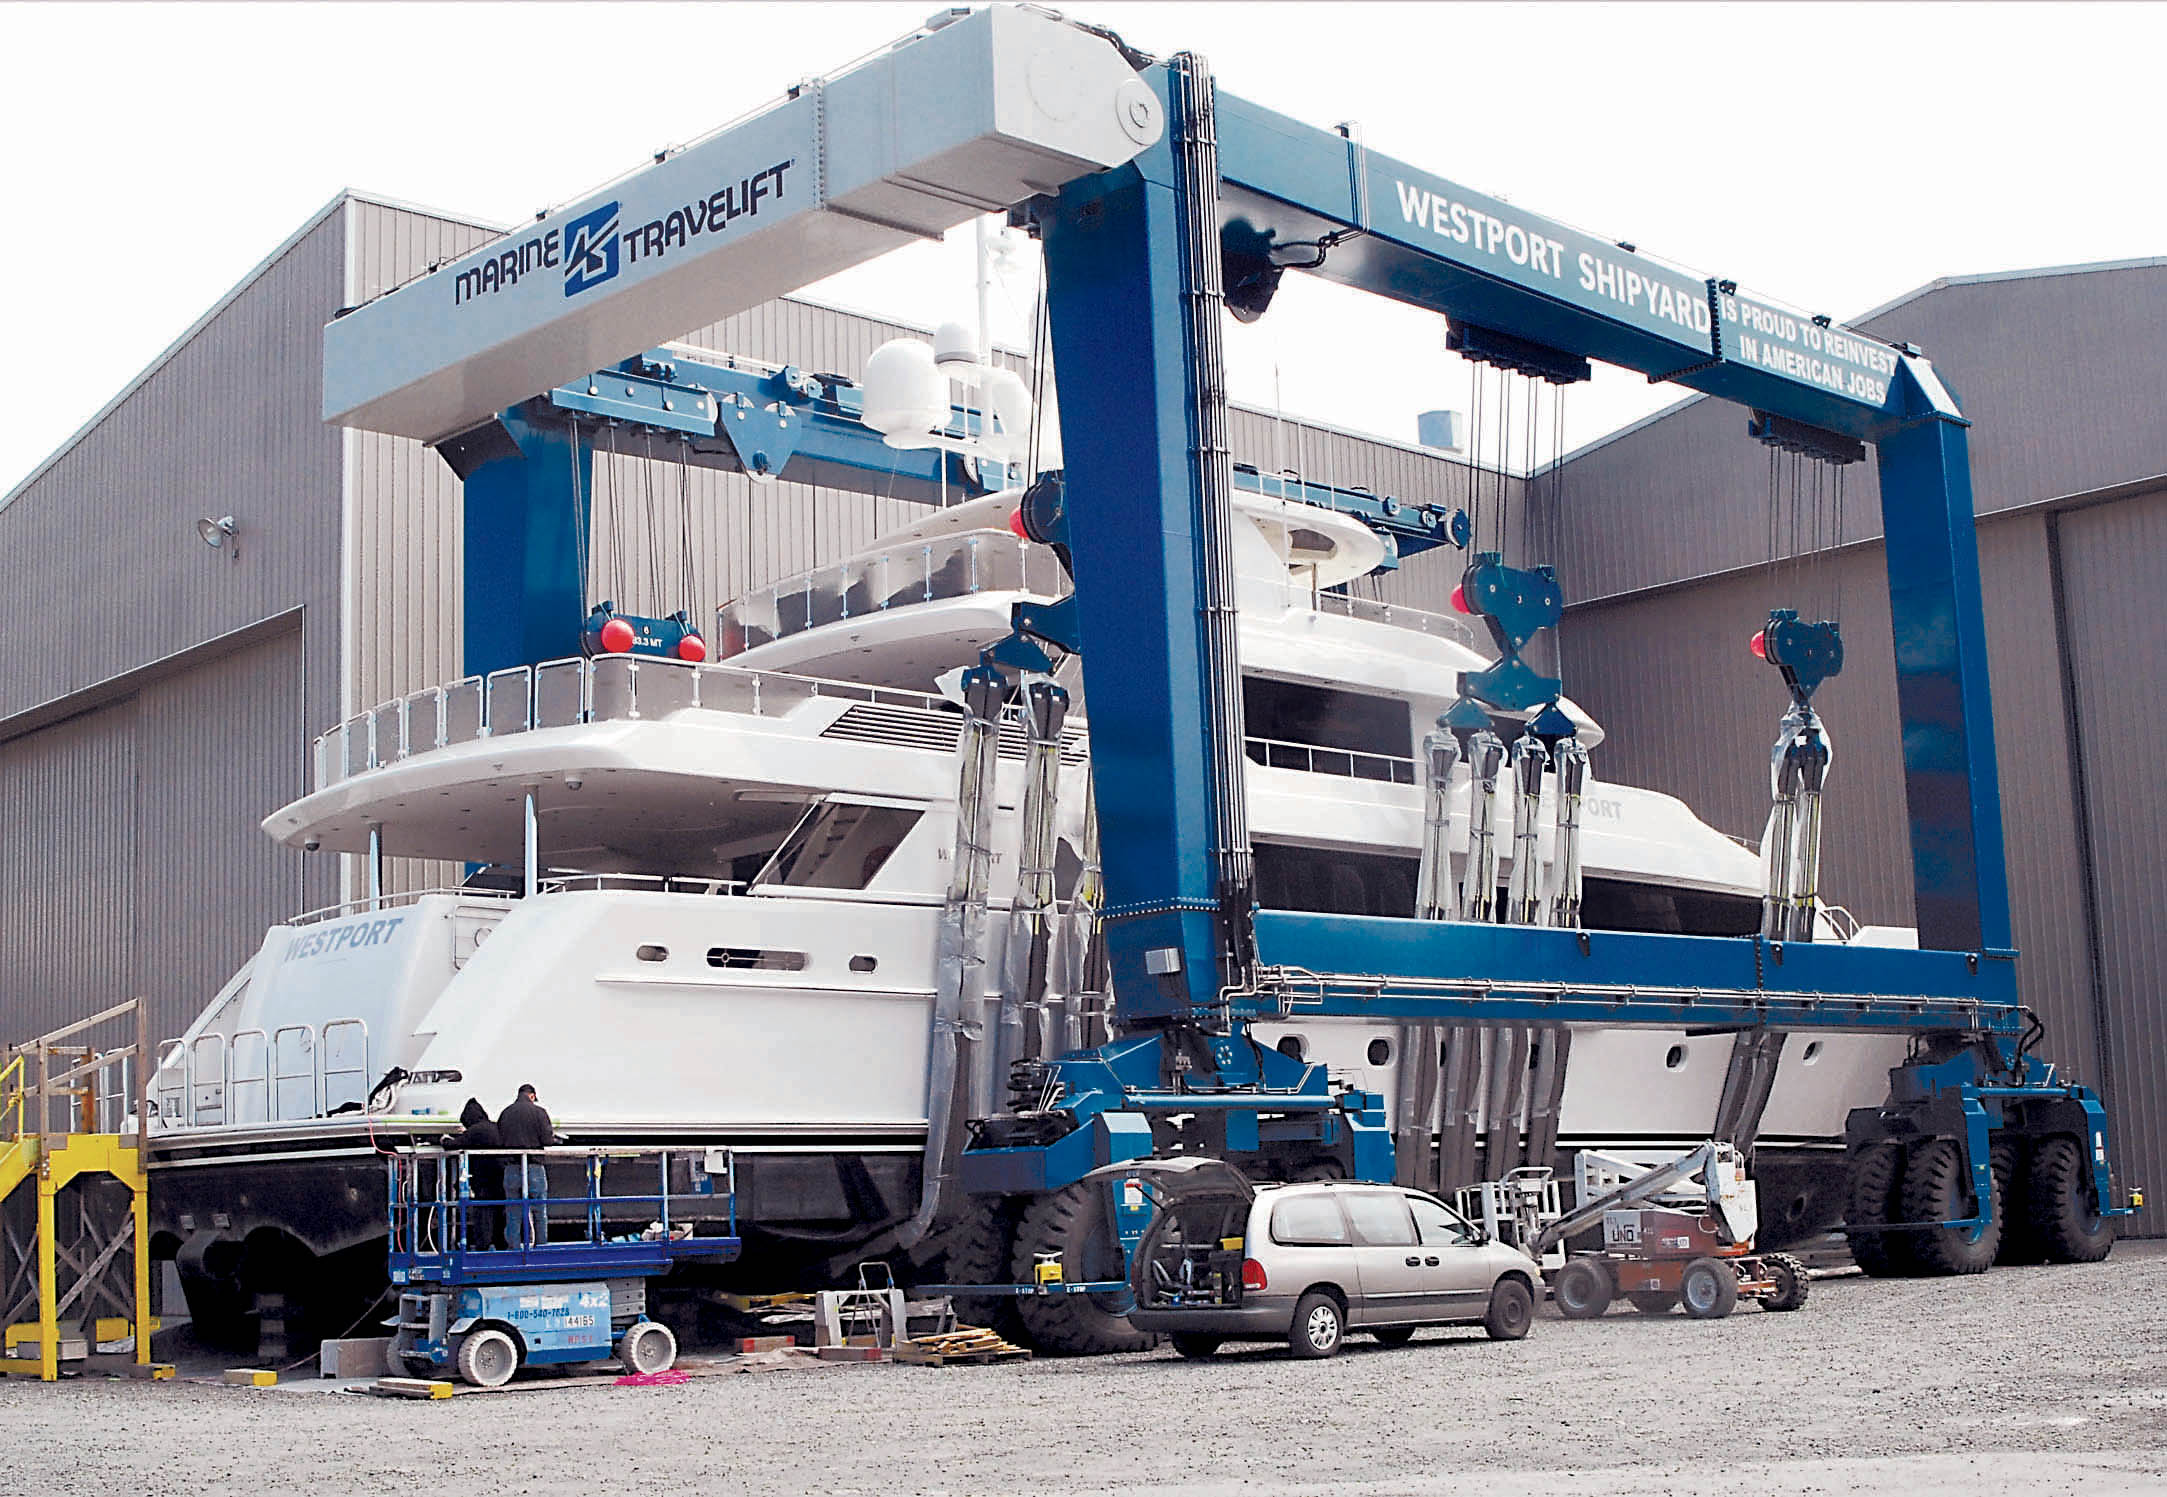 A new 164-foot Westport yacht sits in the slings of a TraveLift outside the company’s factory in Port Angeles in 2012. Westport Shipyard has been sold to a Louisiana-based company.  —Photo by Keith Thorpe/Peninsula Daily News